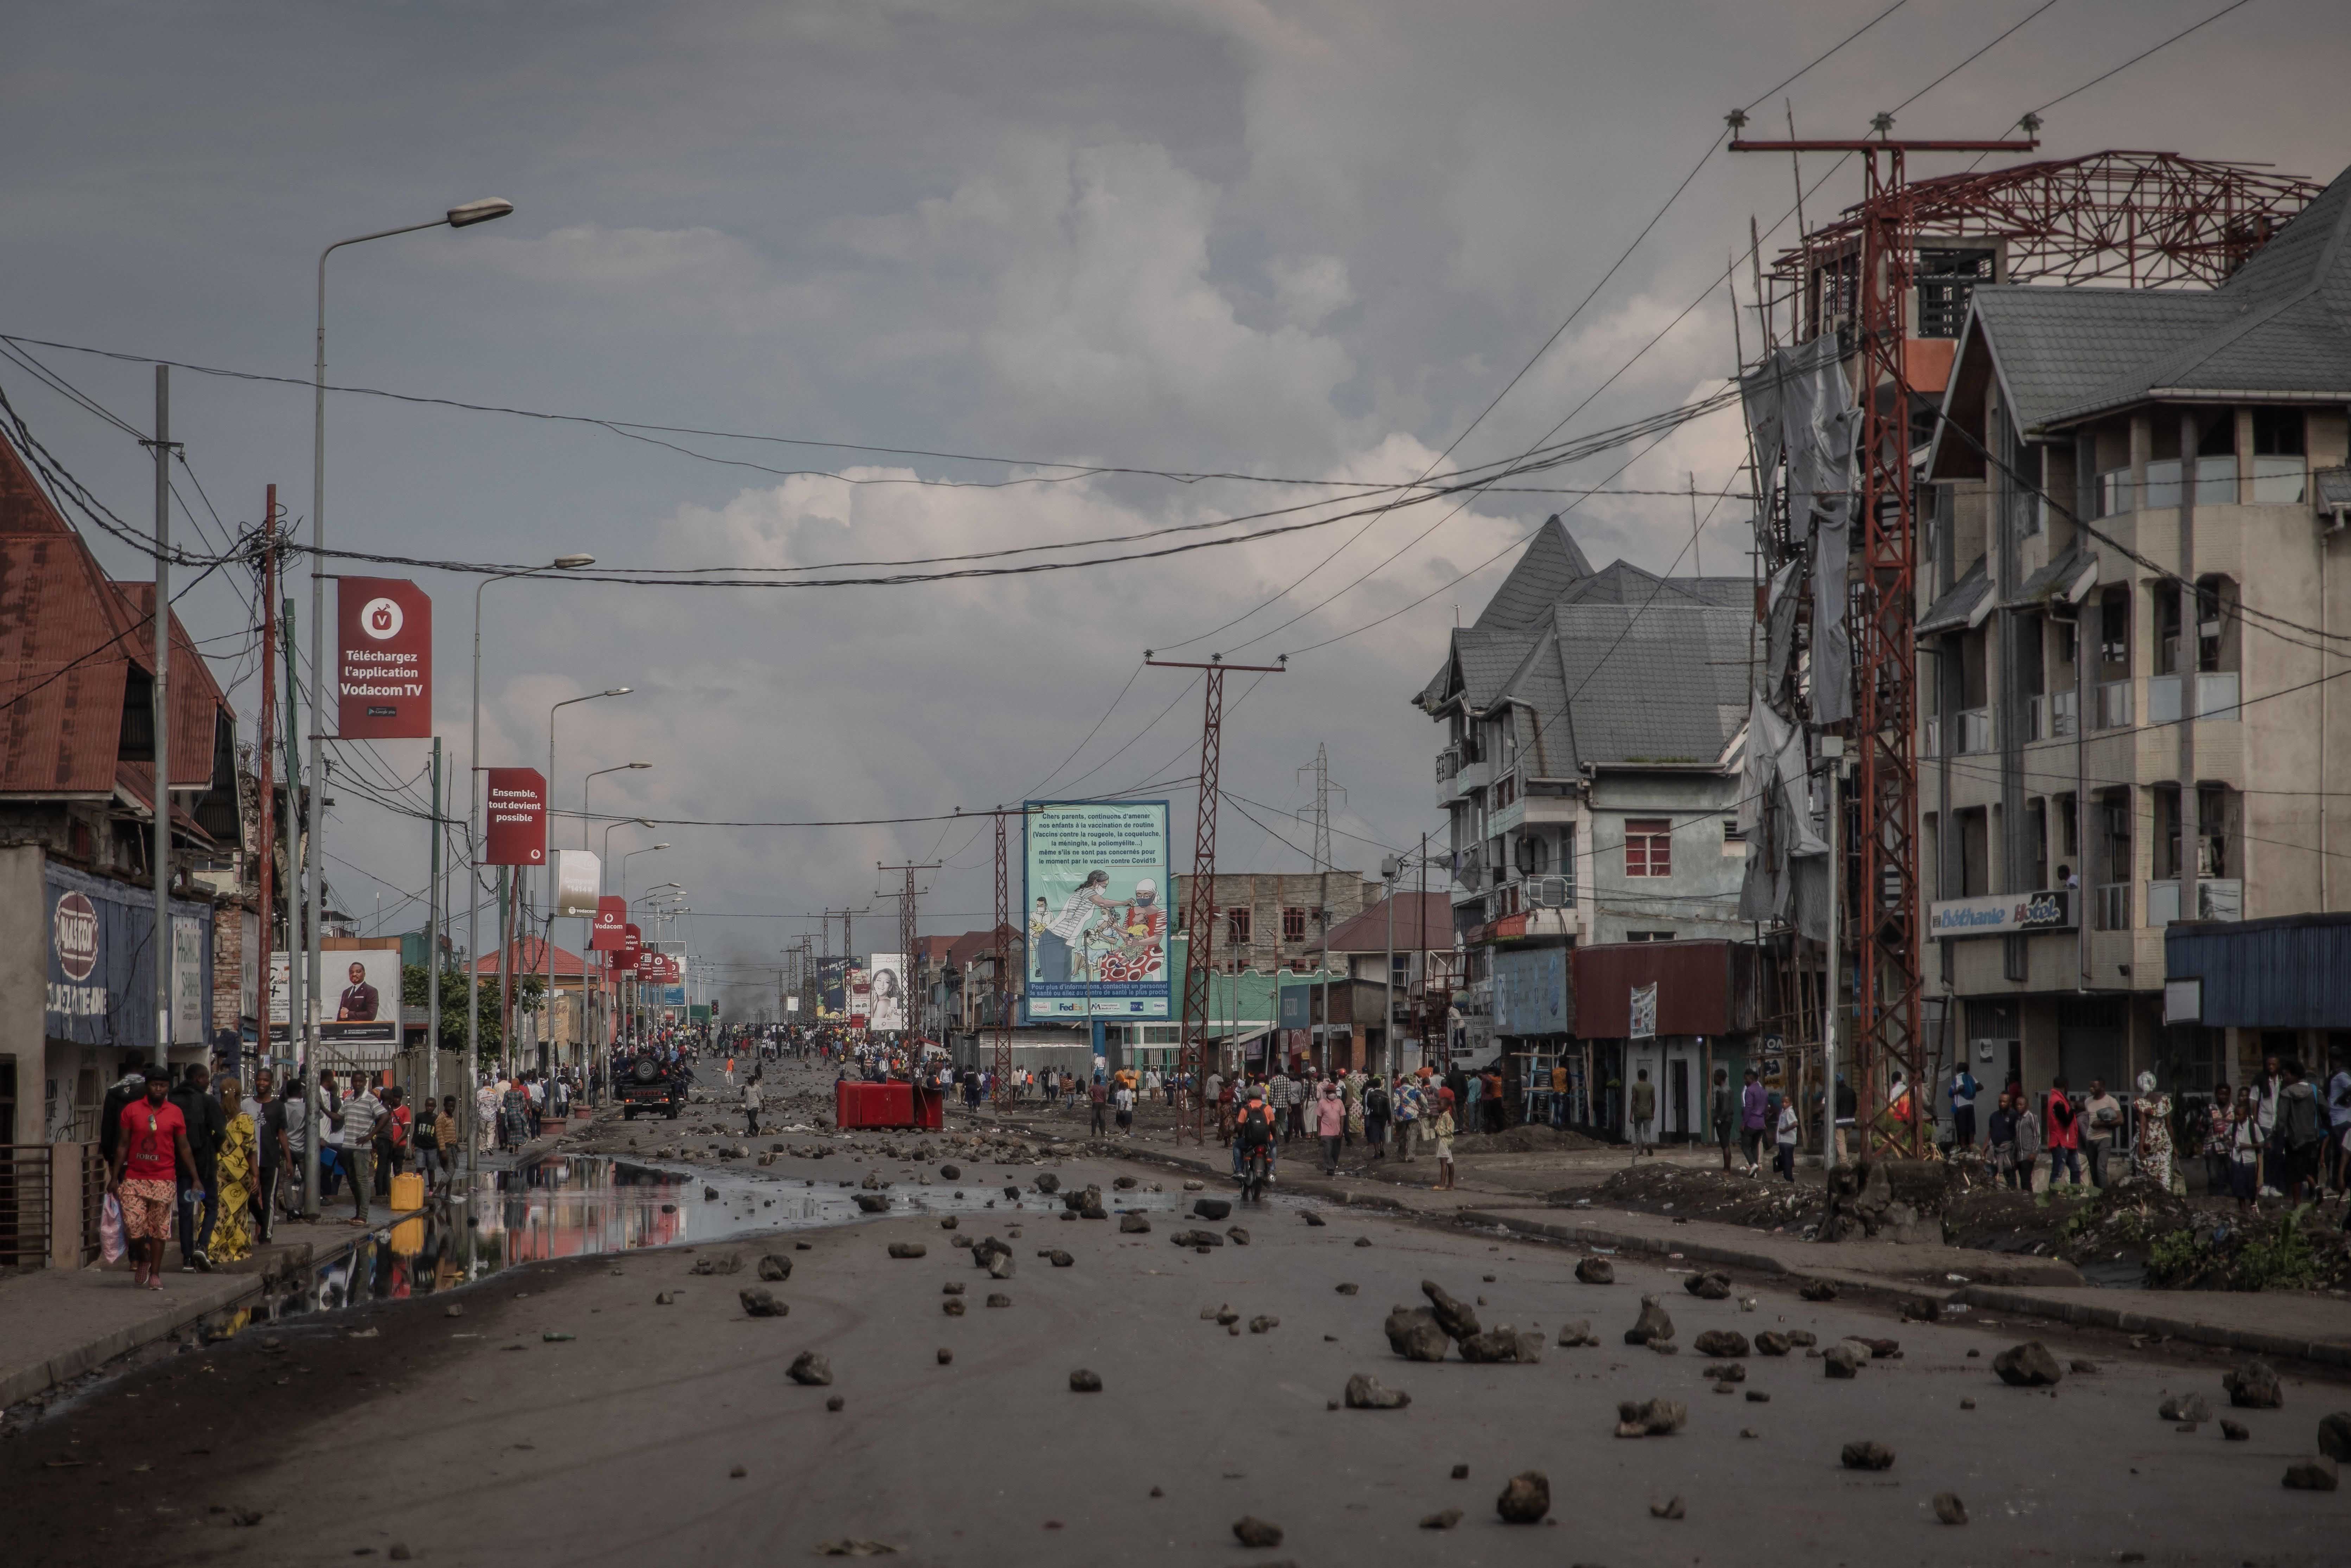 DR Congo: Protesters Shot Dead, Wounded in Goma